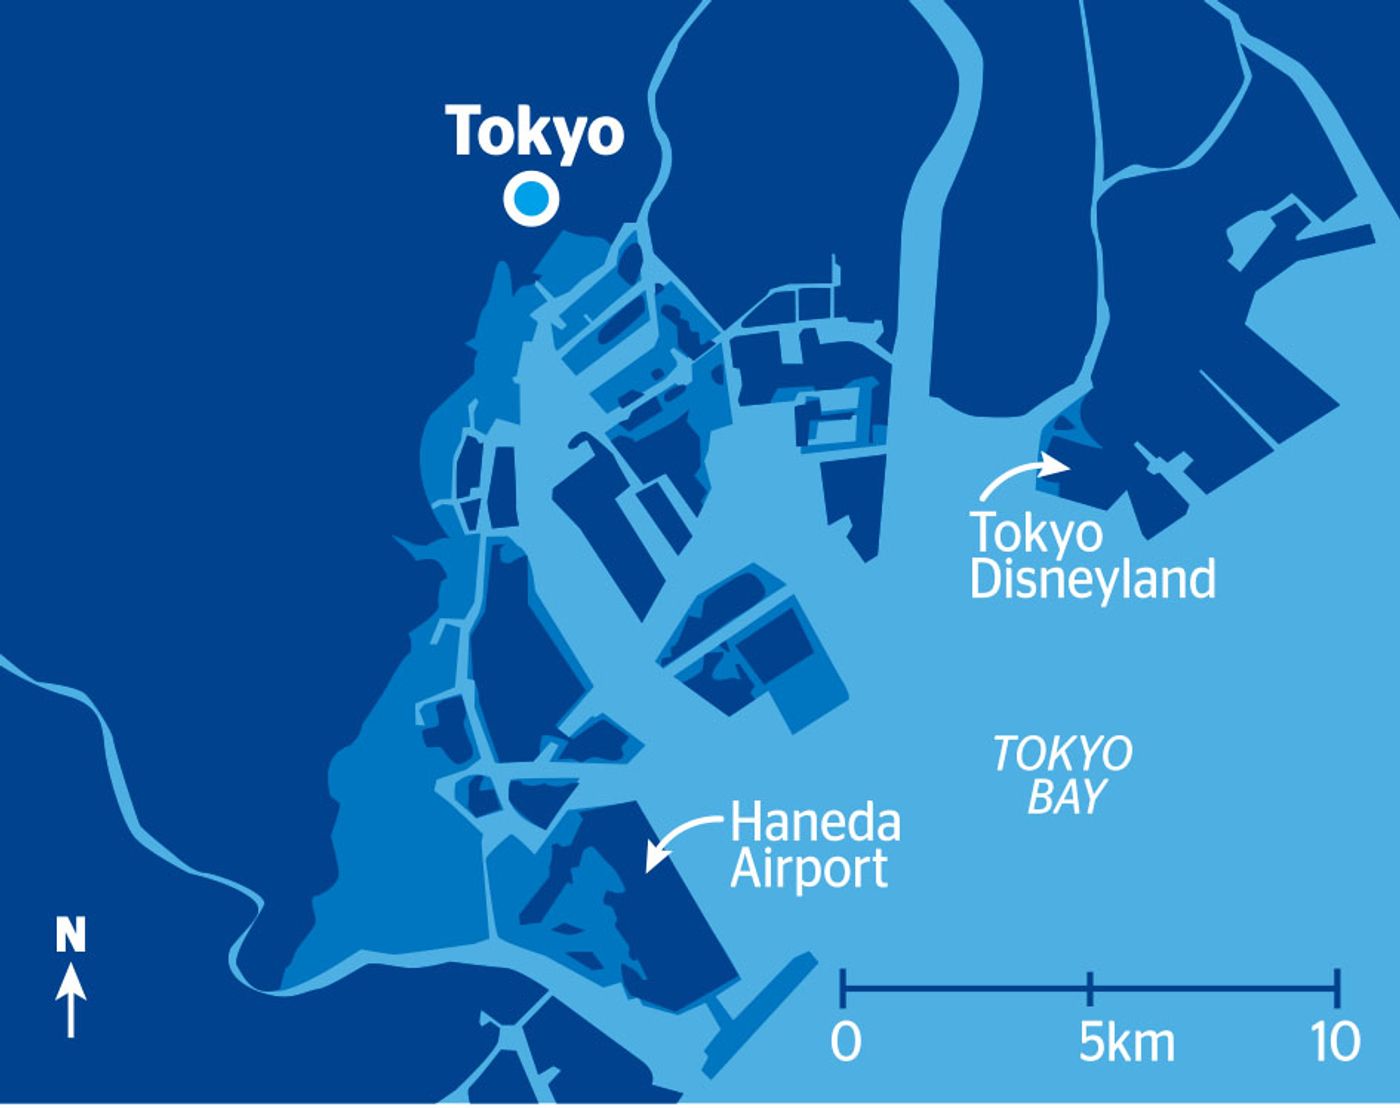 Sea level rise will greatly impact Tokyo. Photo: The Japan TImes